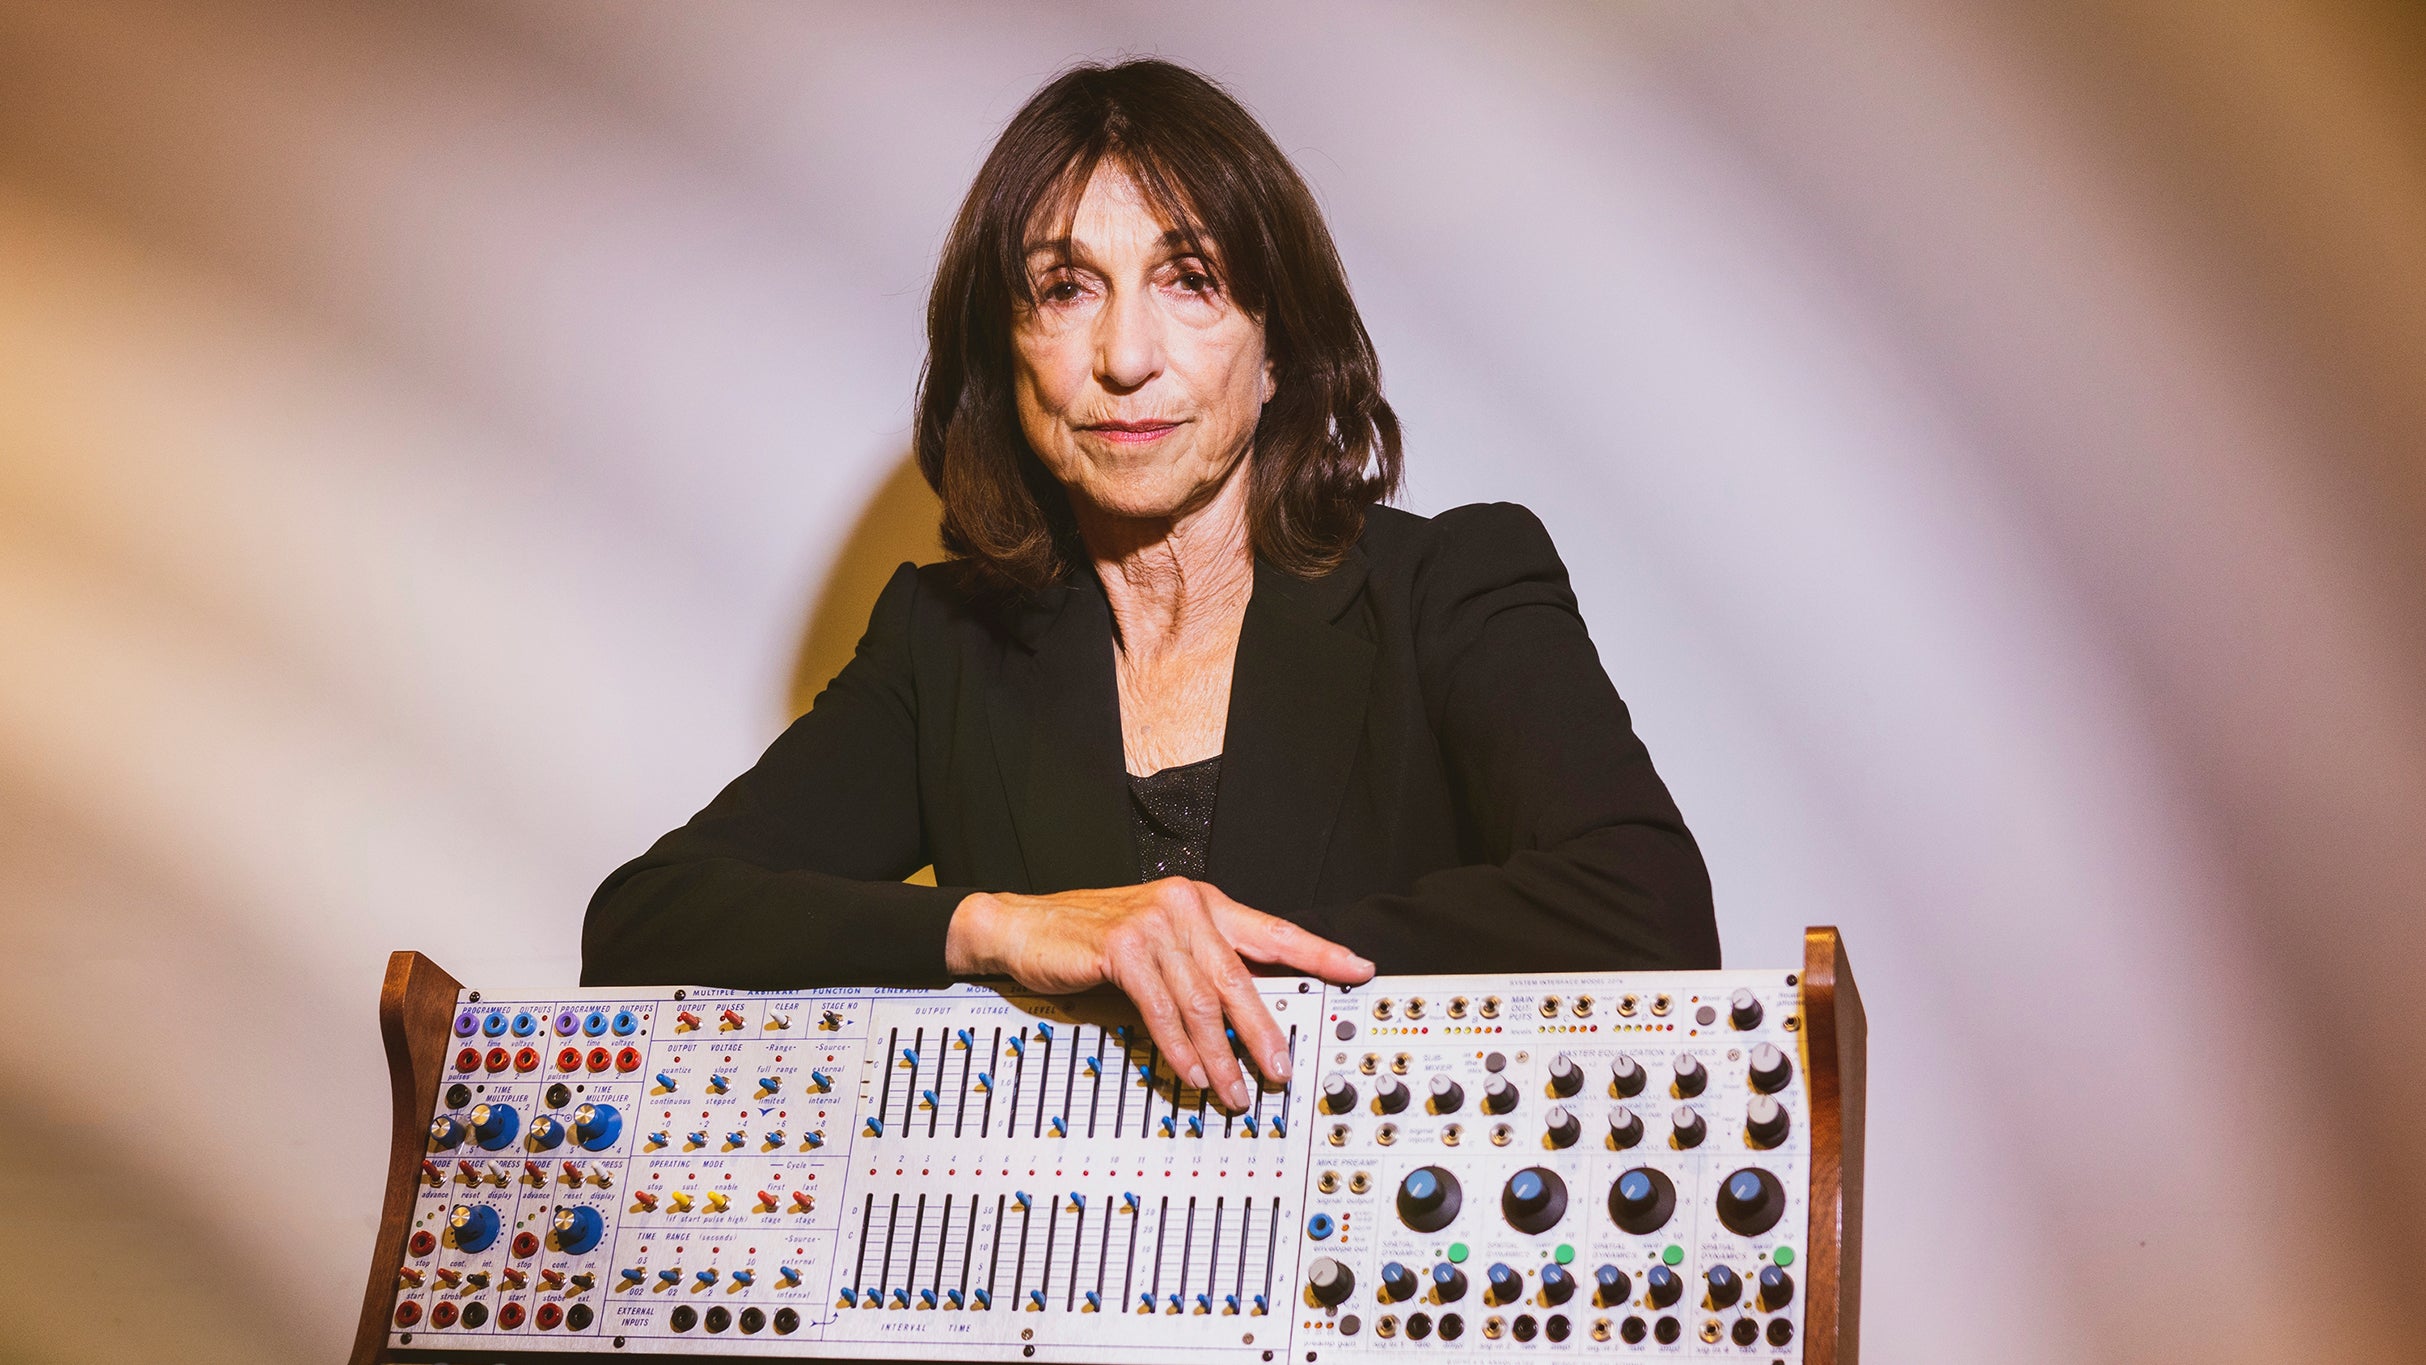 Main image for event titled Suzanne Ciani